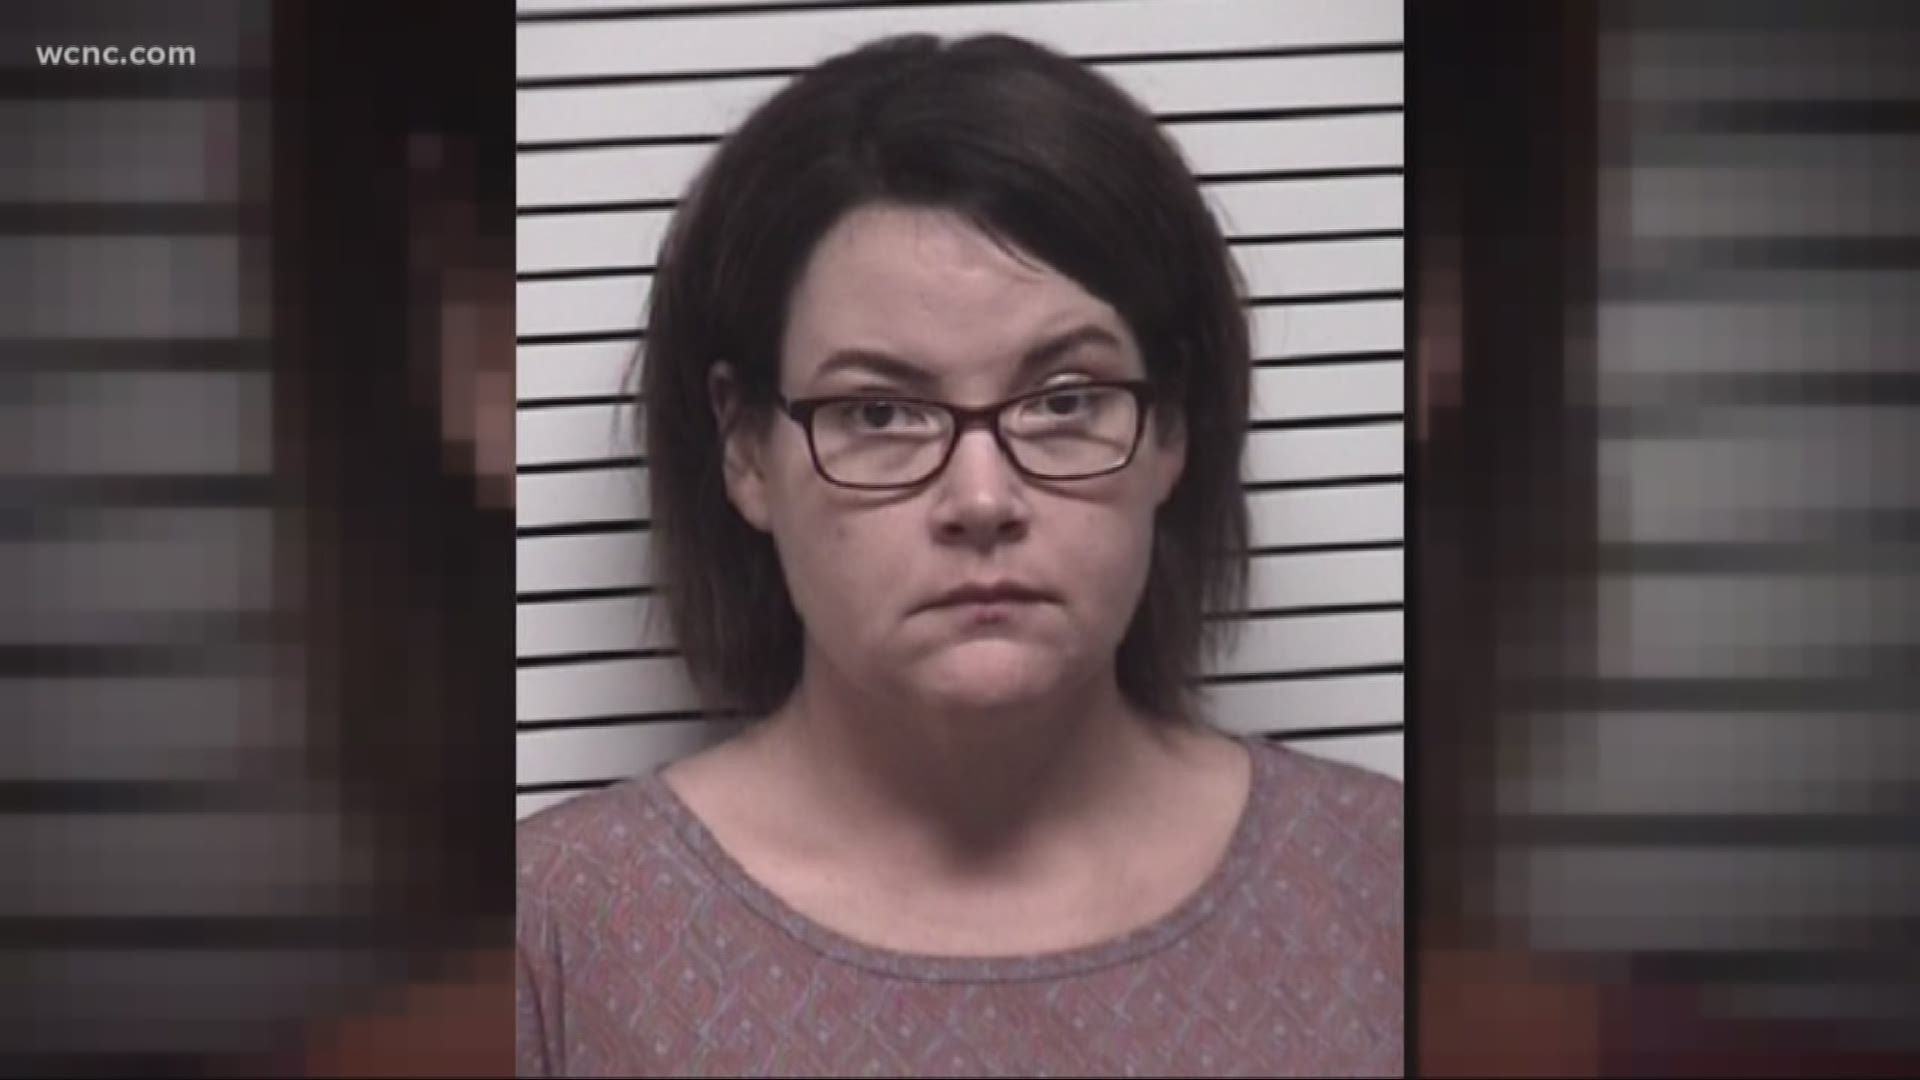 A Statesville teacher is behind bars accused of sex crimes with a minor, the minor was not one of her students.